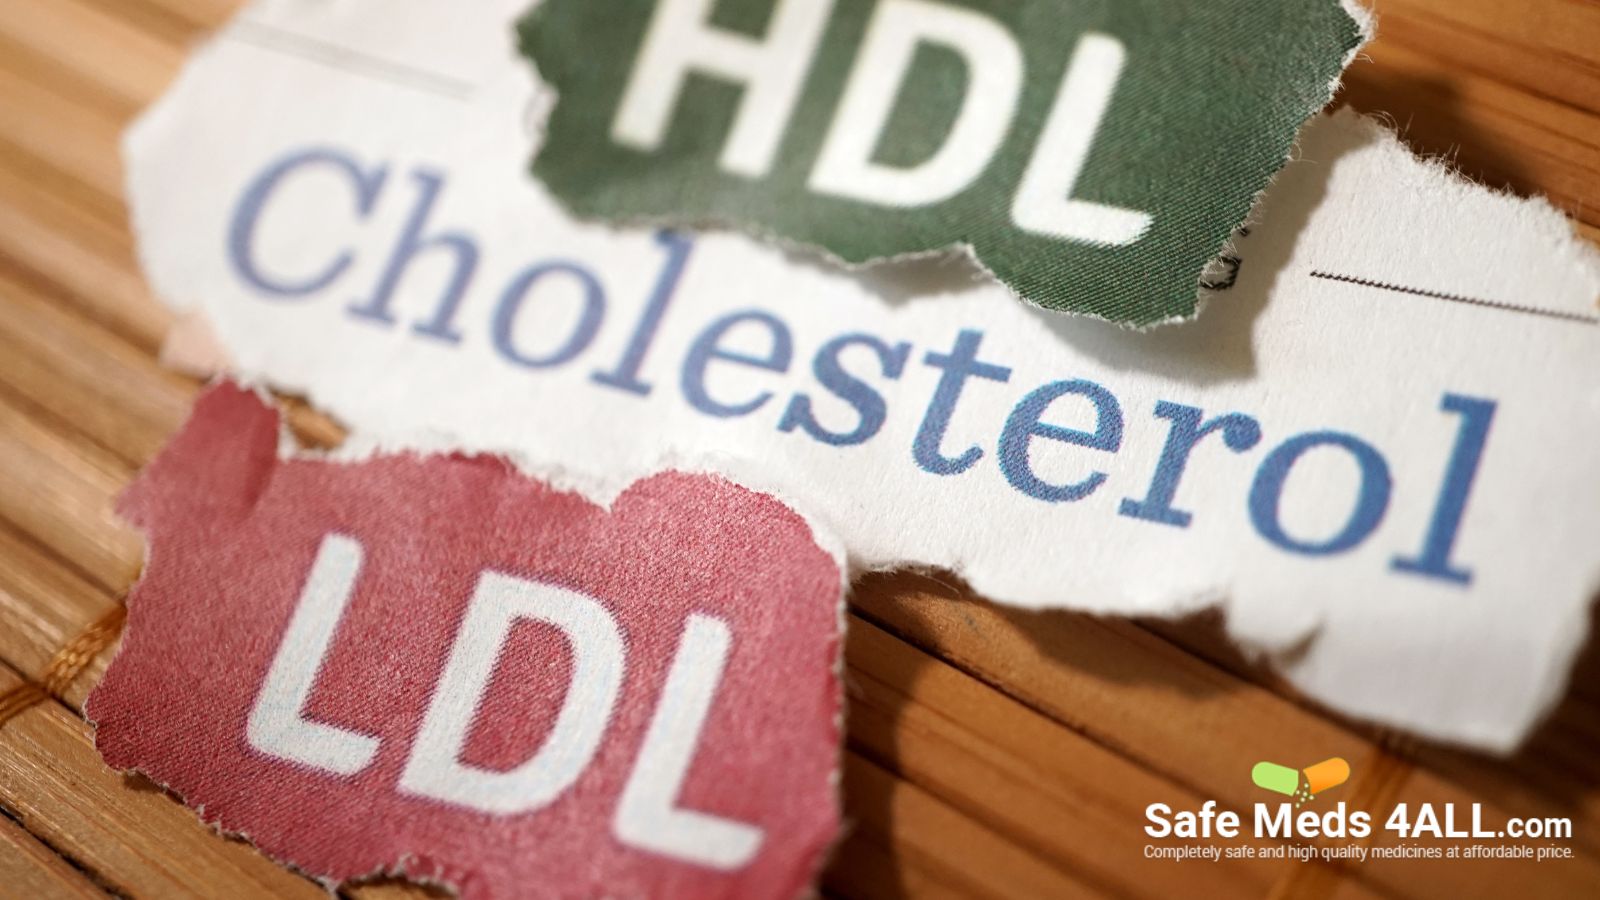 Lower bad cholesterol or LDL and increase good cholesterol or HDL with life style changes and cholestrol lowering medication.